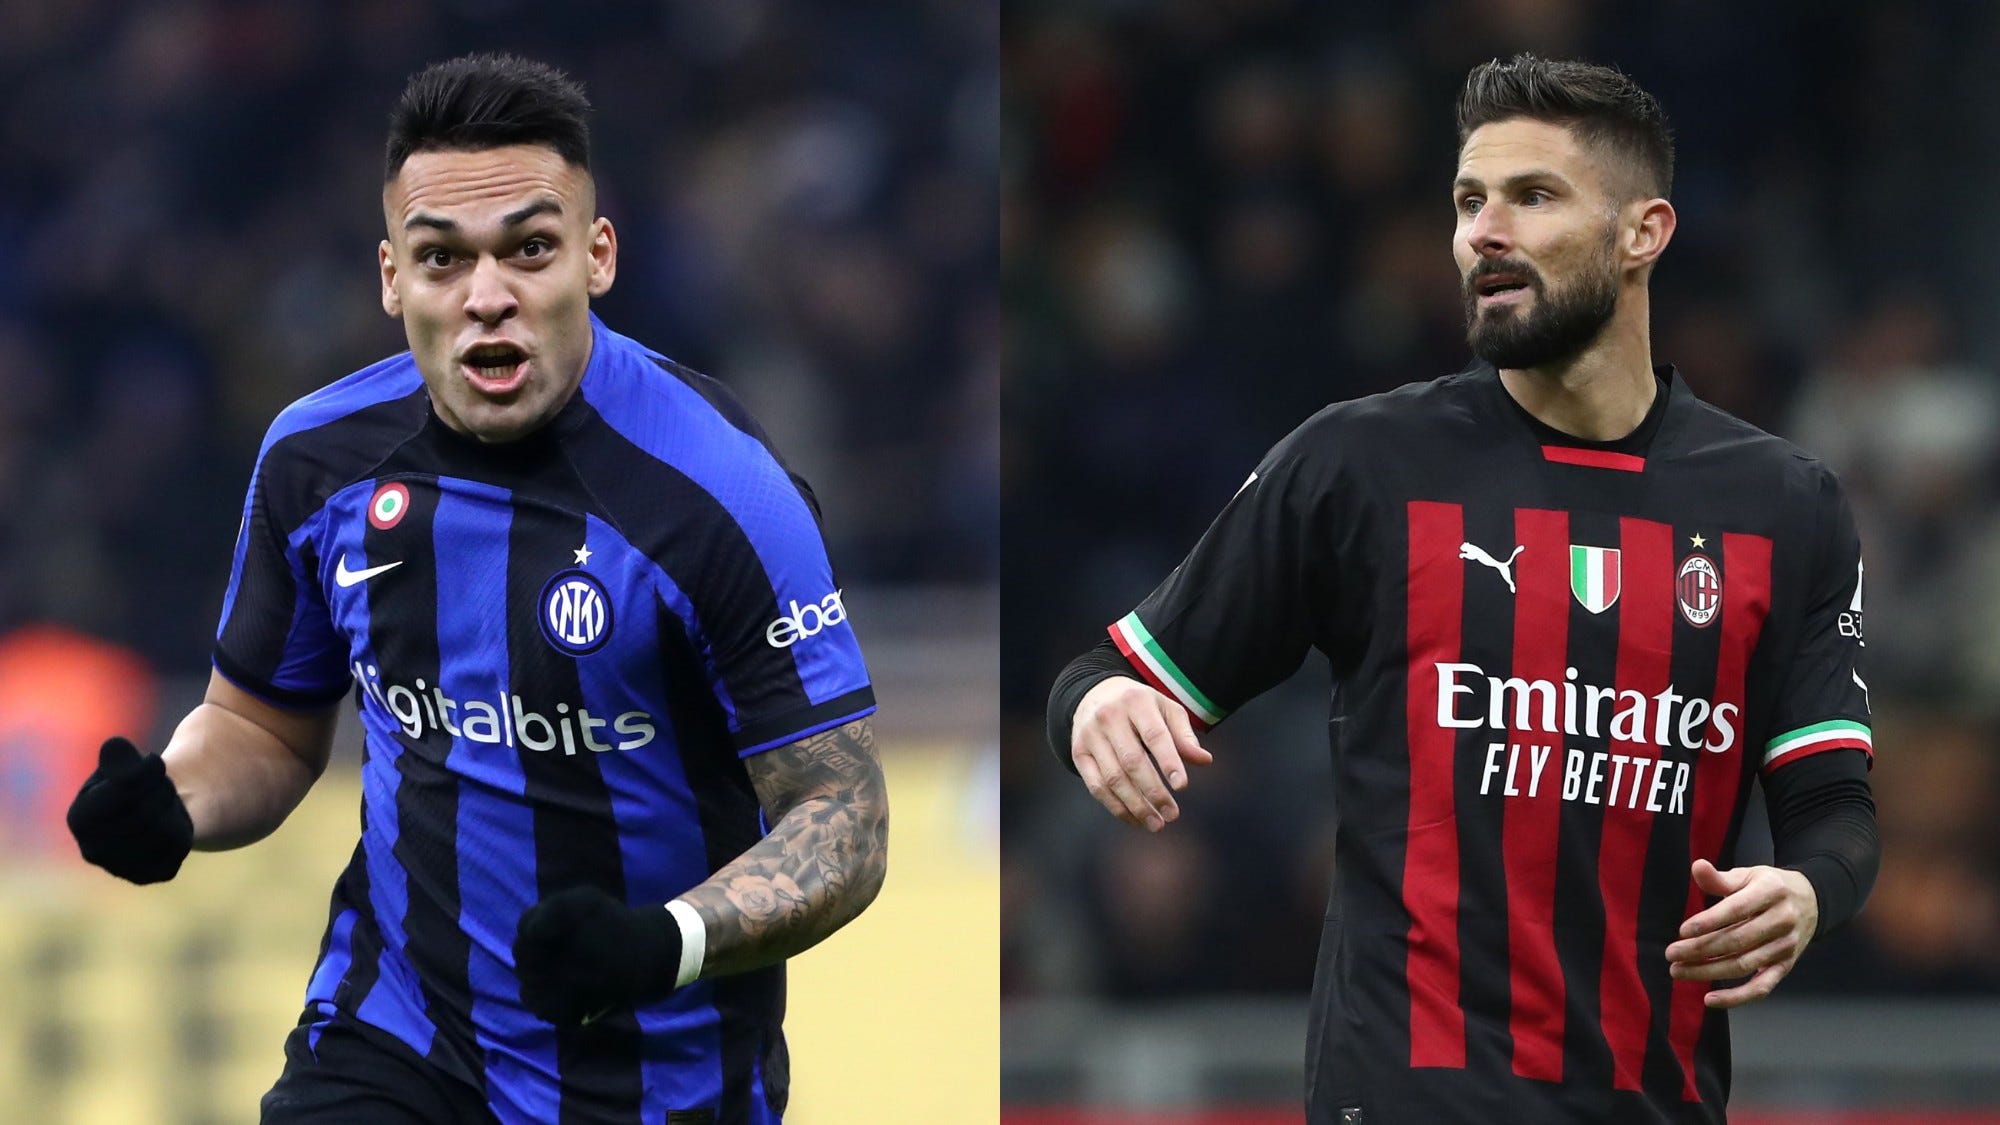 Inter vs AC Milan Live stream, TV channel, kick-off time and where to watch Goal US